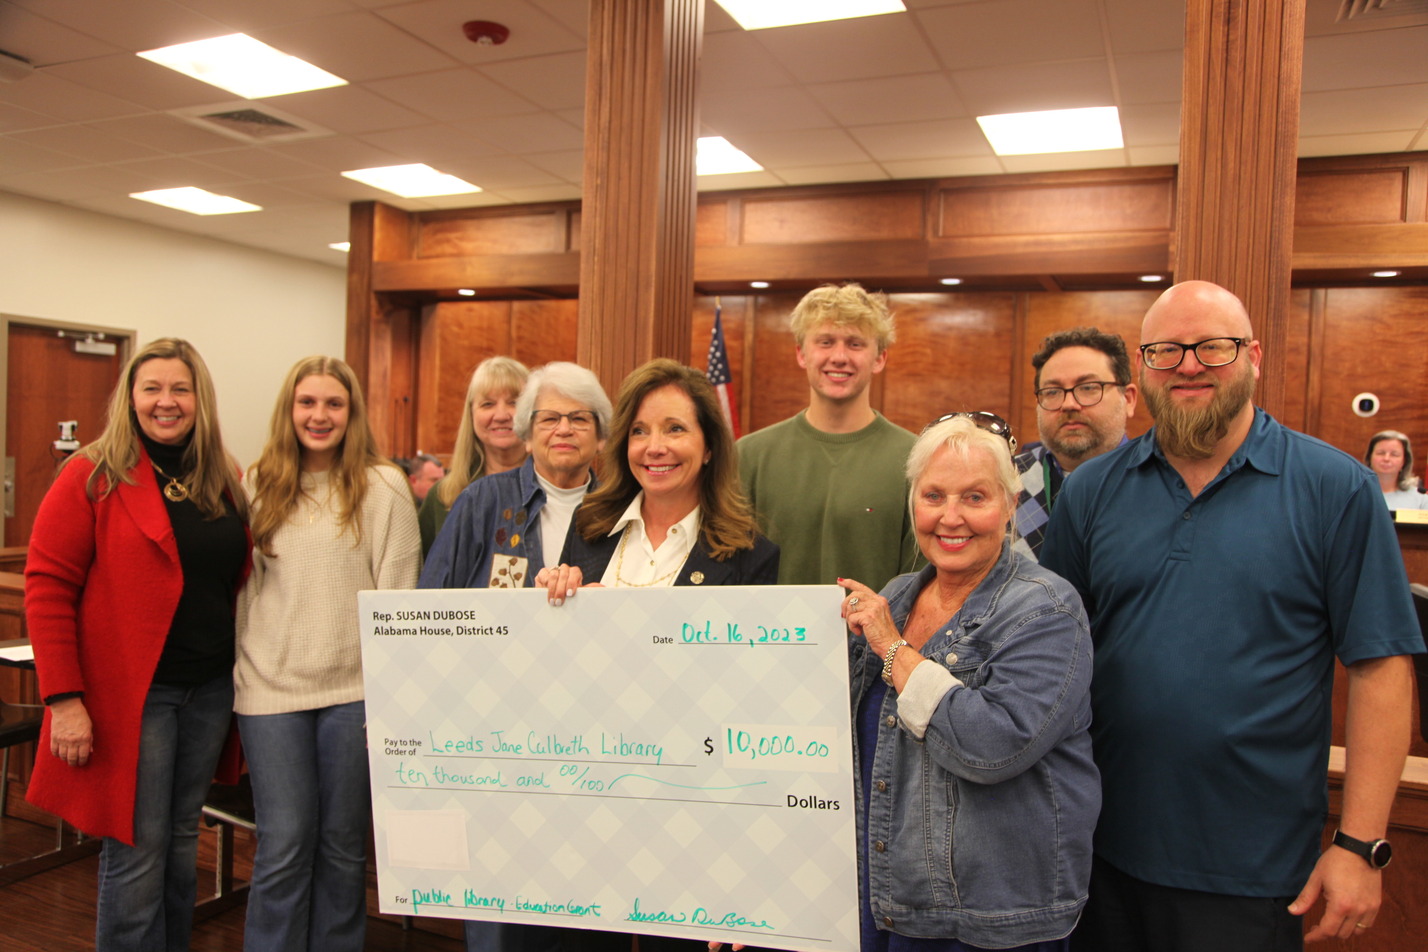 Susan DuBose presents $10,000 to library at council meeting, LHS Band raising money for trip